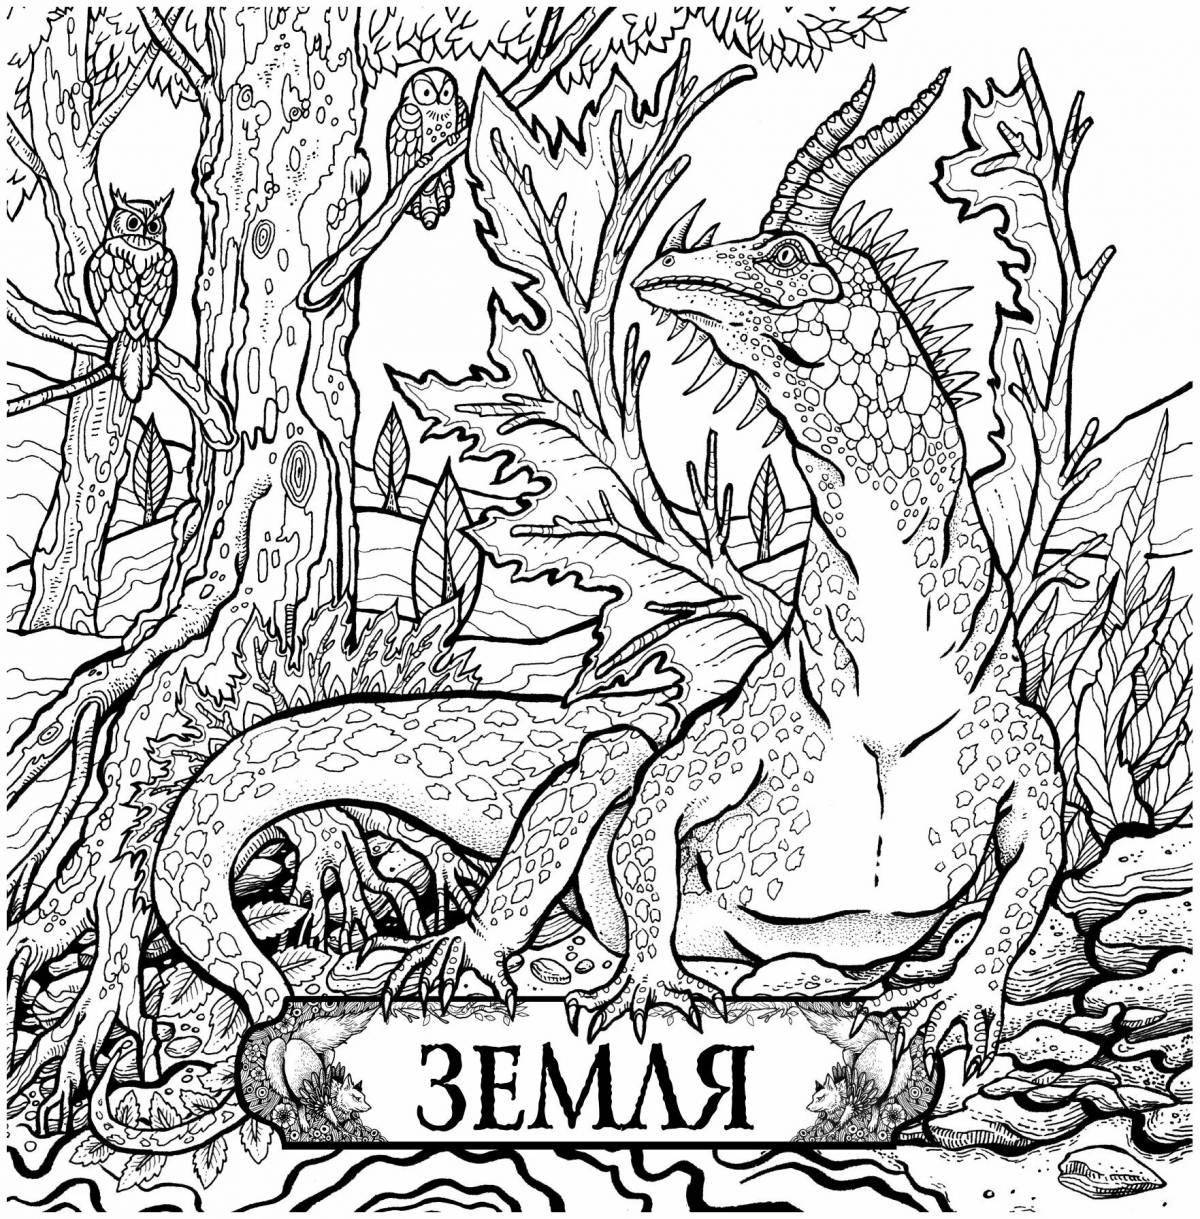 A wonderful coloring book with fantasy creatures